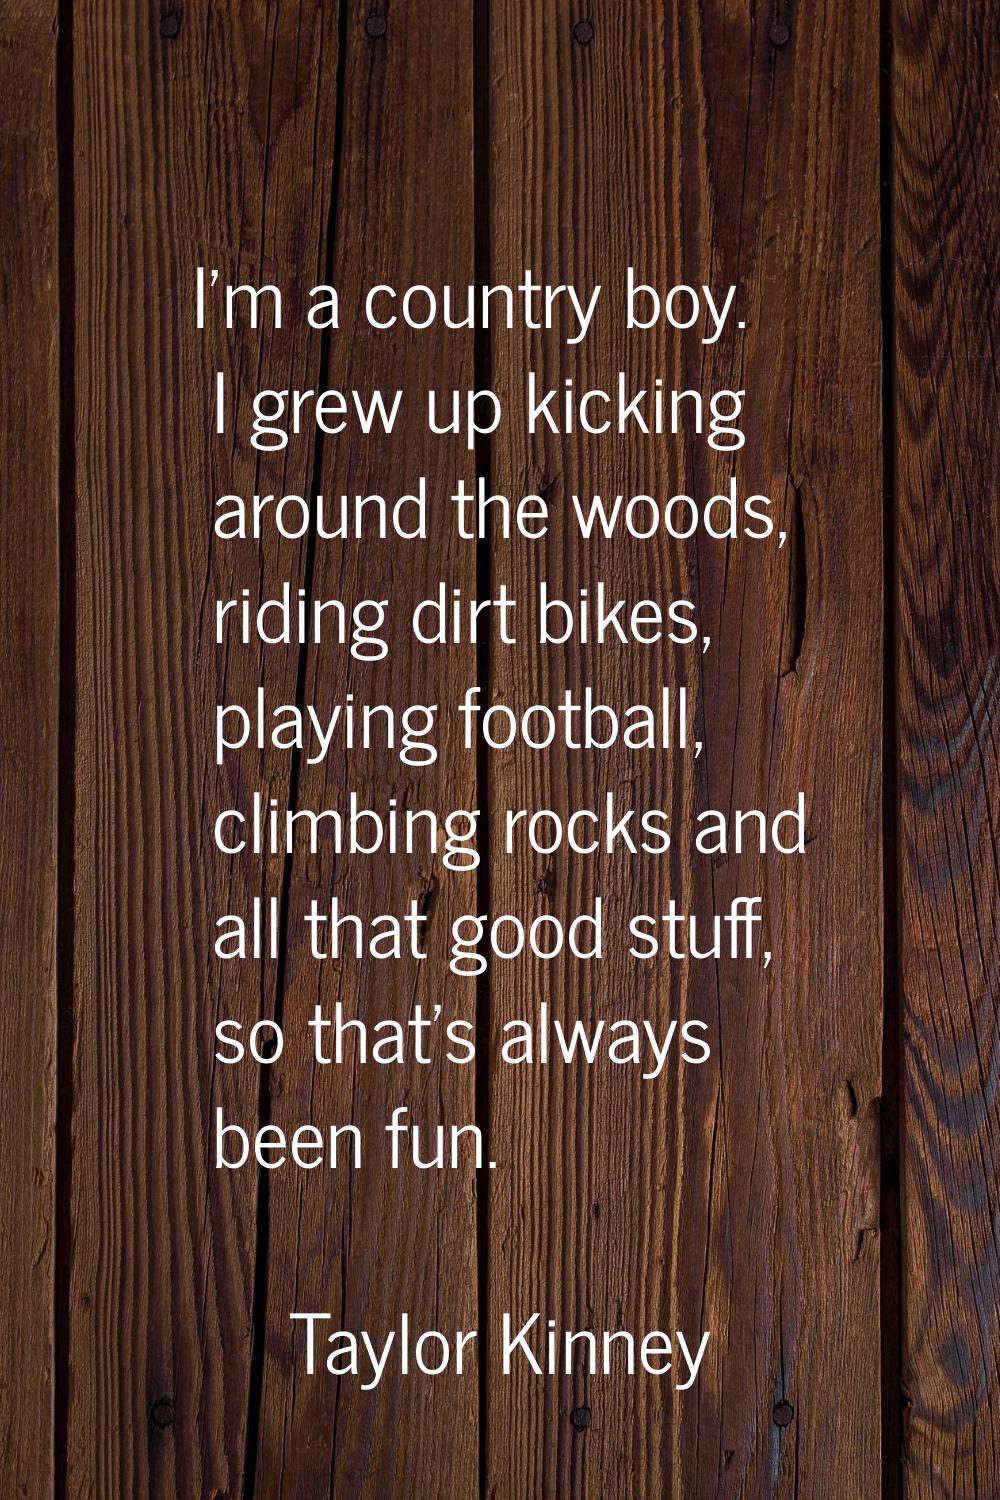 I'm a country boy. I grew up kicking around the woods, riding dirt bikes, playing football, climbin